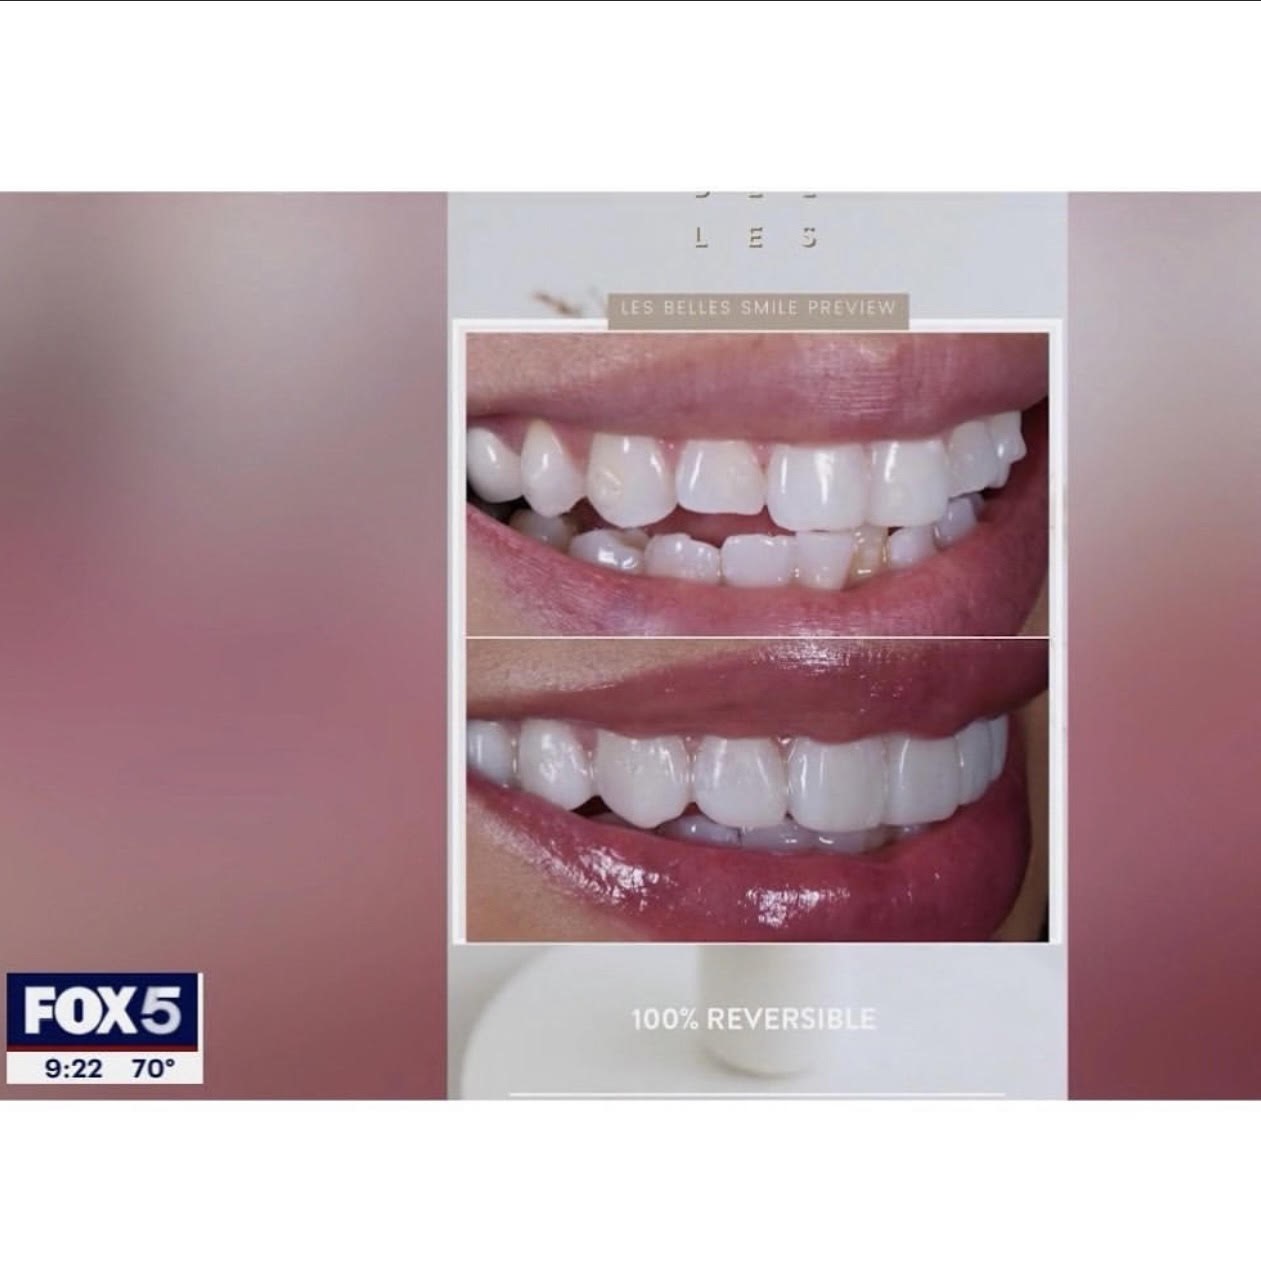 Teeth before and after Les Belles Smile Preview